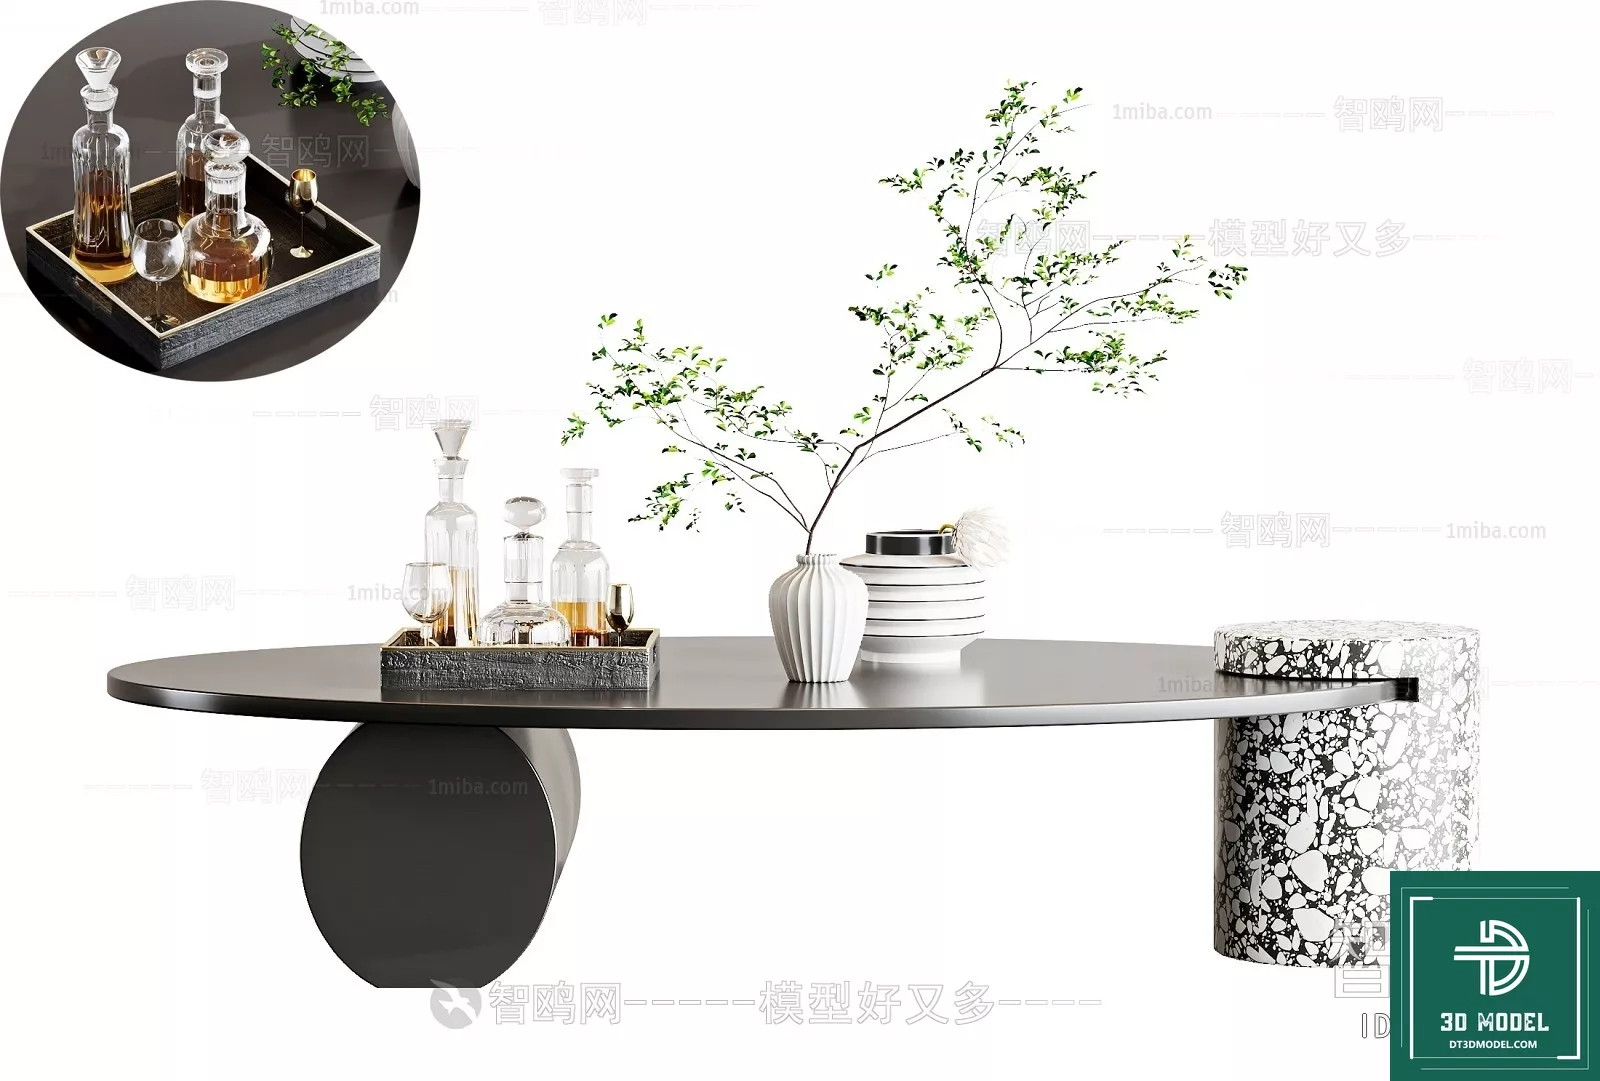 MODERN TEA TABLE - SKETCHUP 3D MODEL - VRAY OR ENSCAPE - ID14946